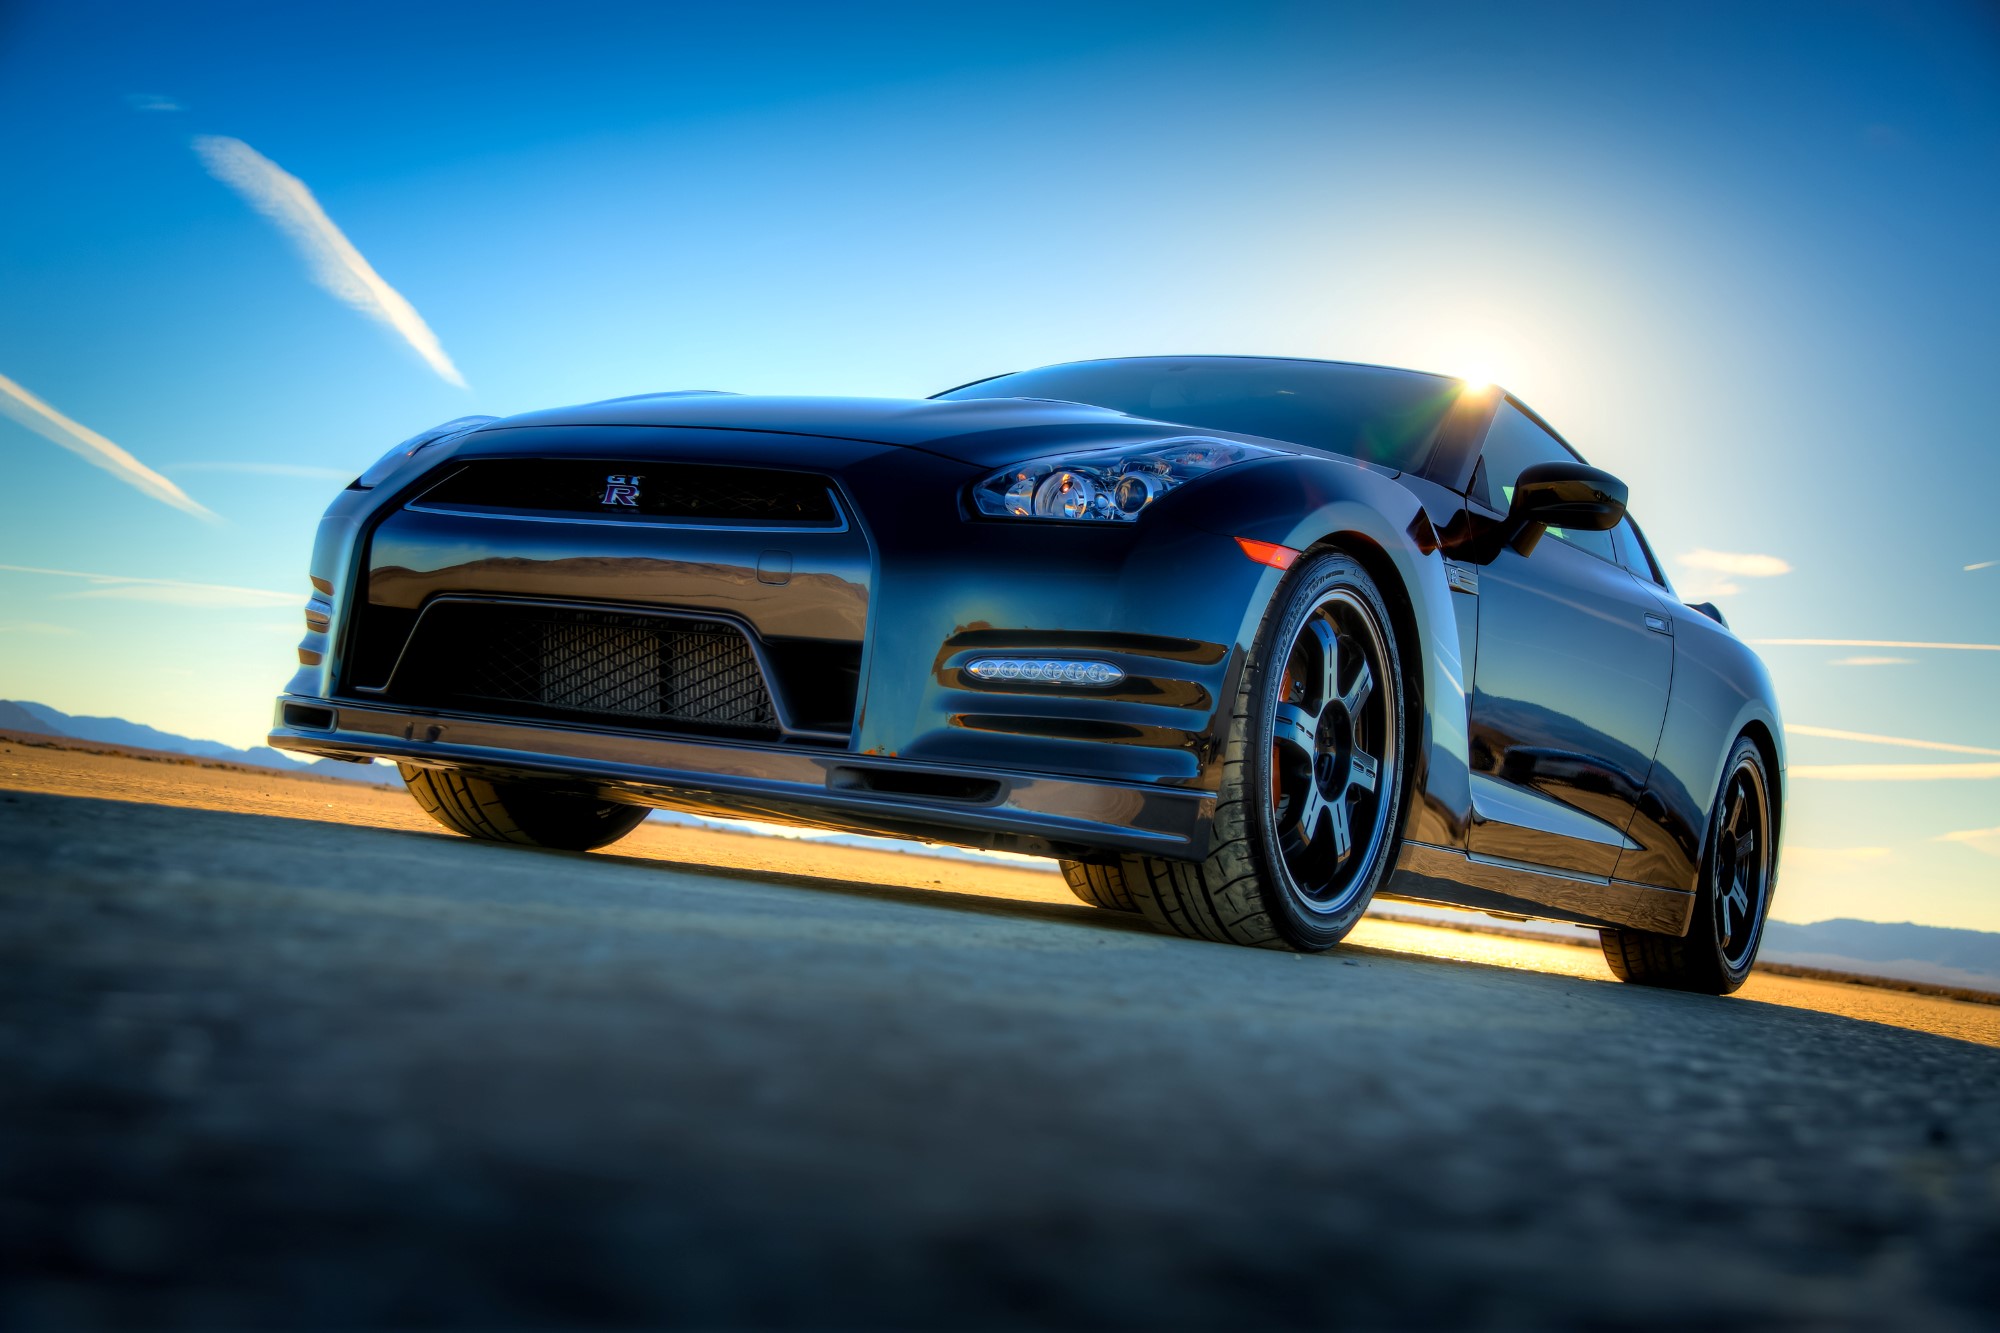 14 Nissan Gt R Review Ratings Specs Prices And Photos The Car Connection